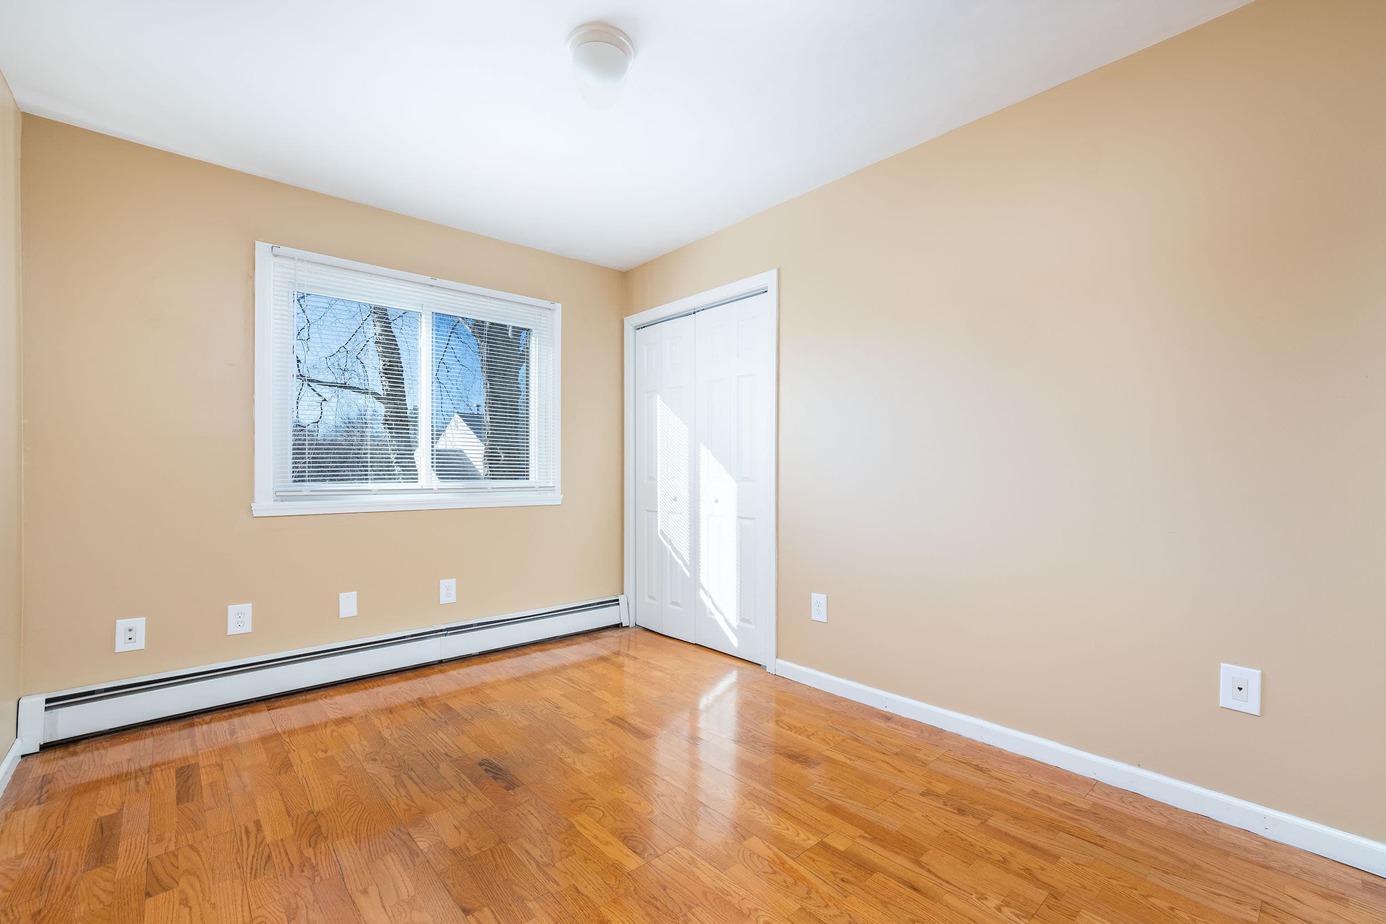 3rd bedroom with refinished hardwood floors and baseboard heat